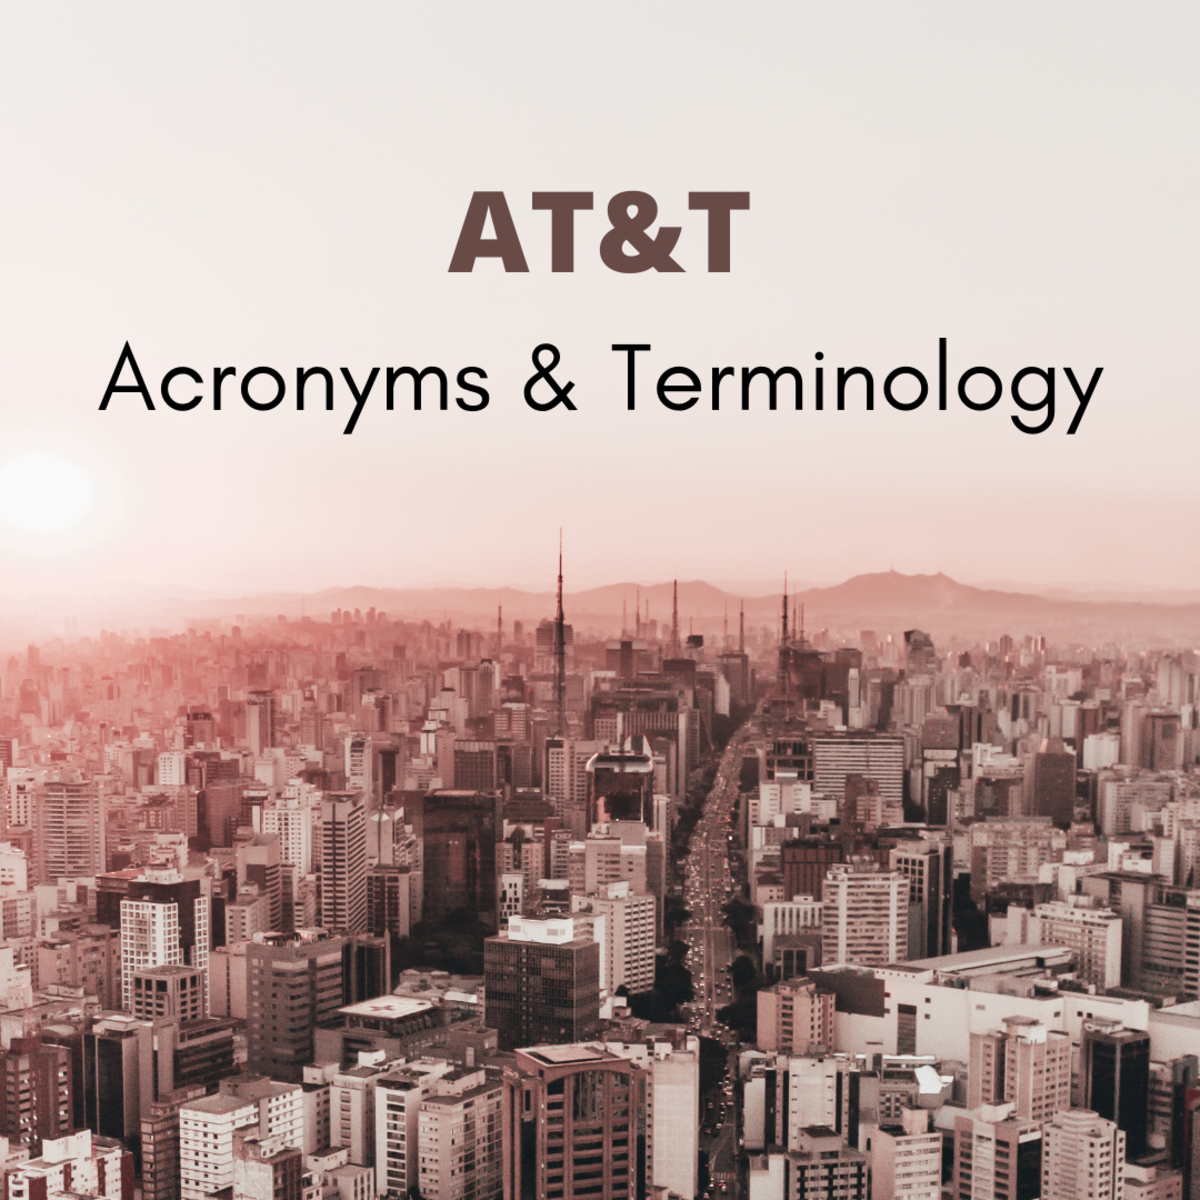 AT&T Language, Acronyms, and Telephony Talk (With Photos)